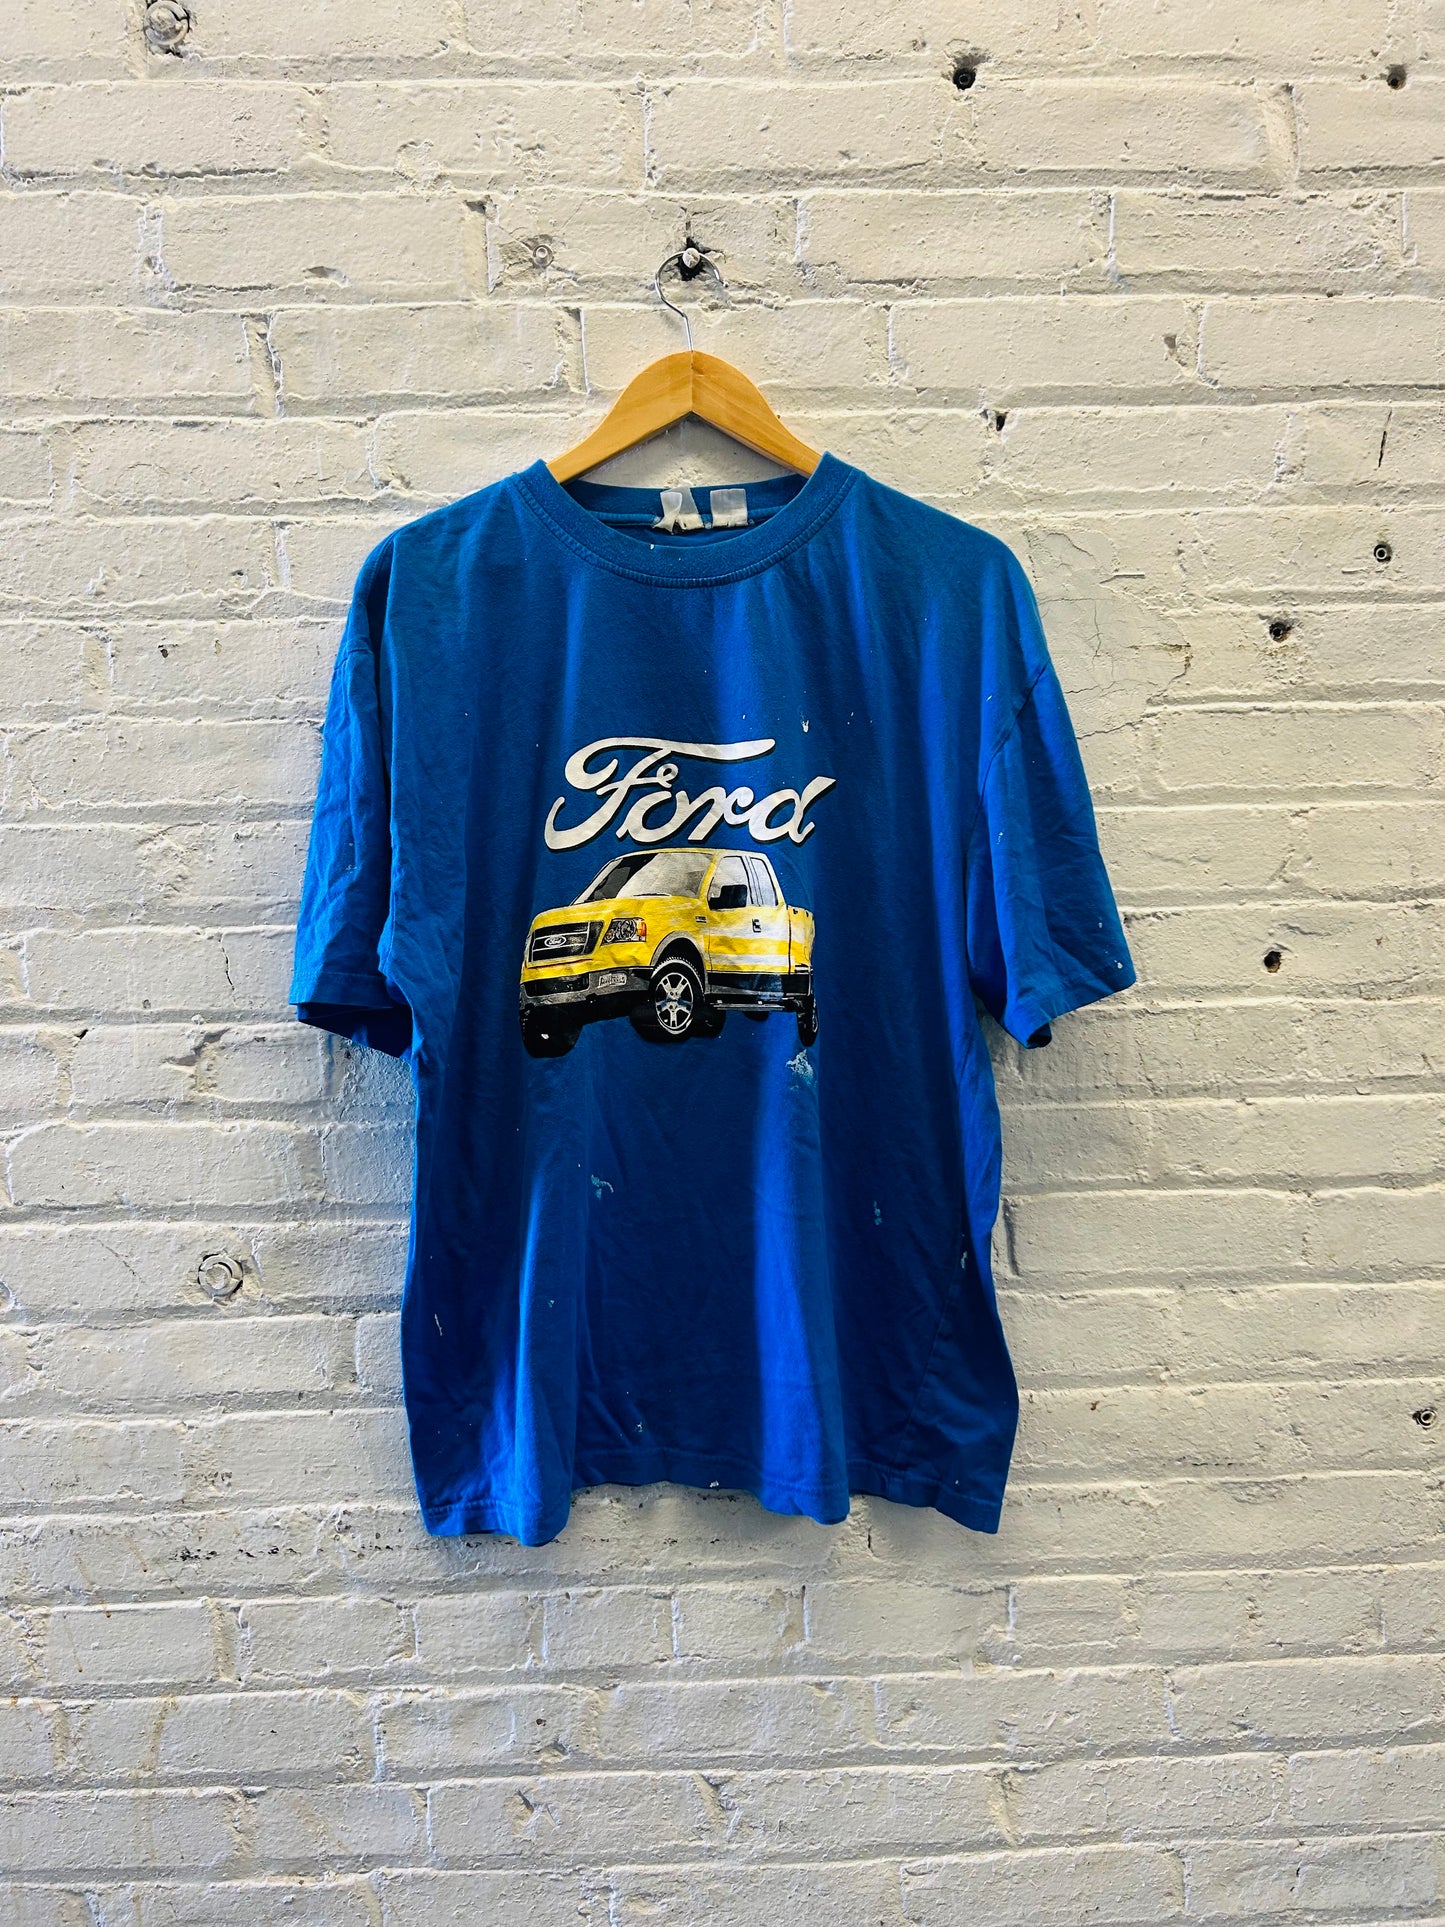 Ford F-150 Truck Shirt - Large